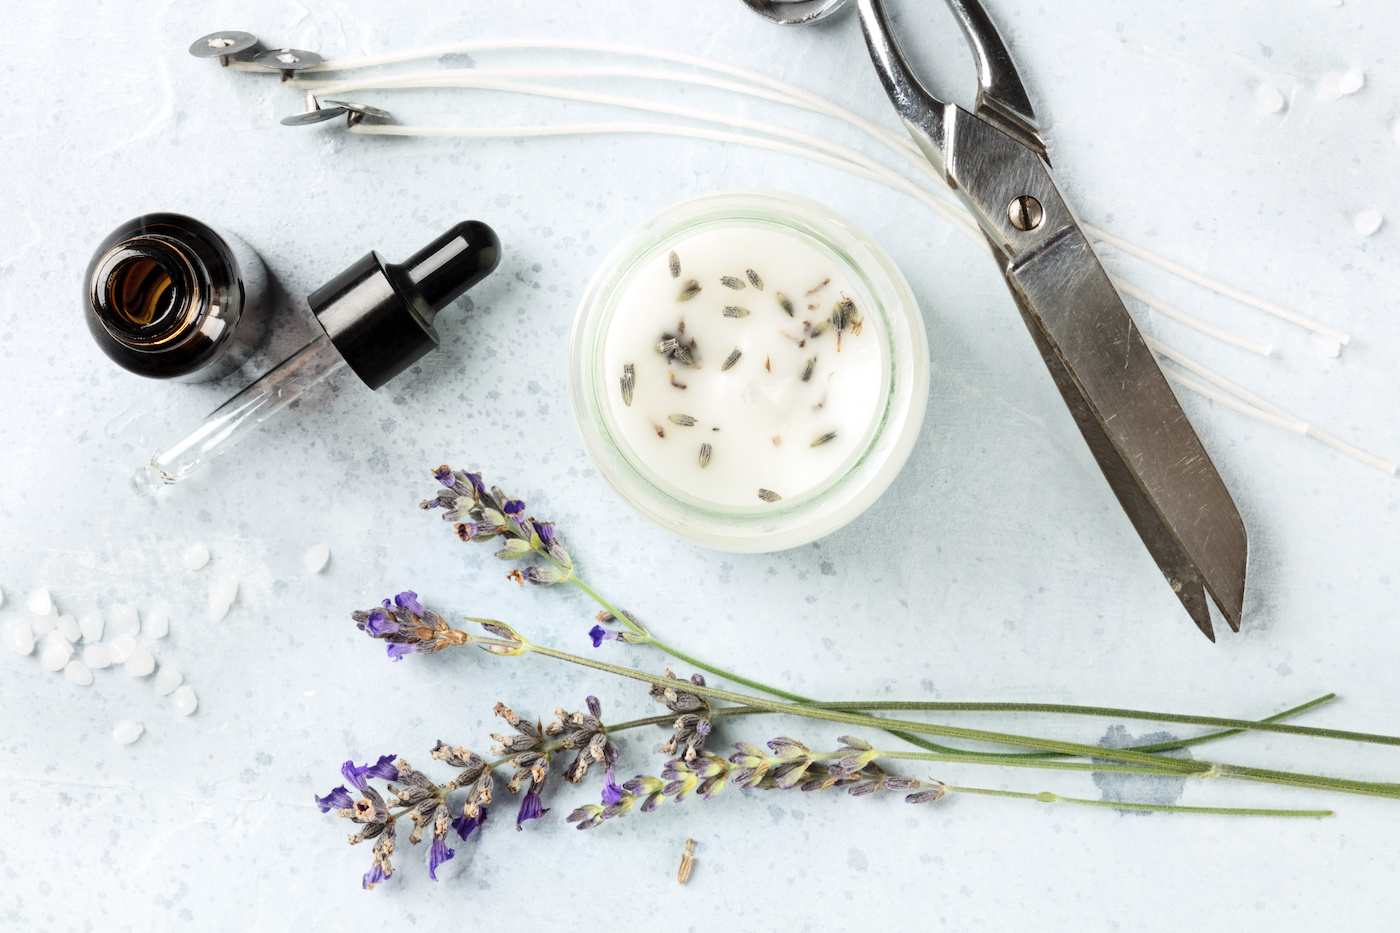 Candle making with lavender essential oils